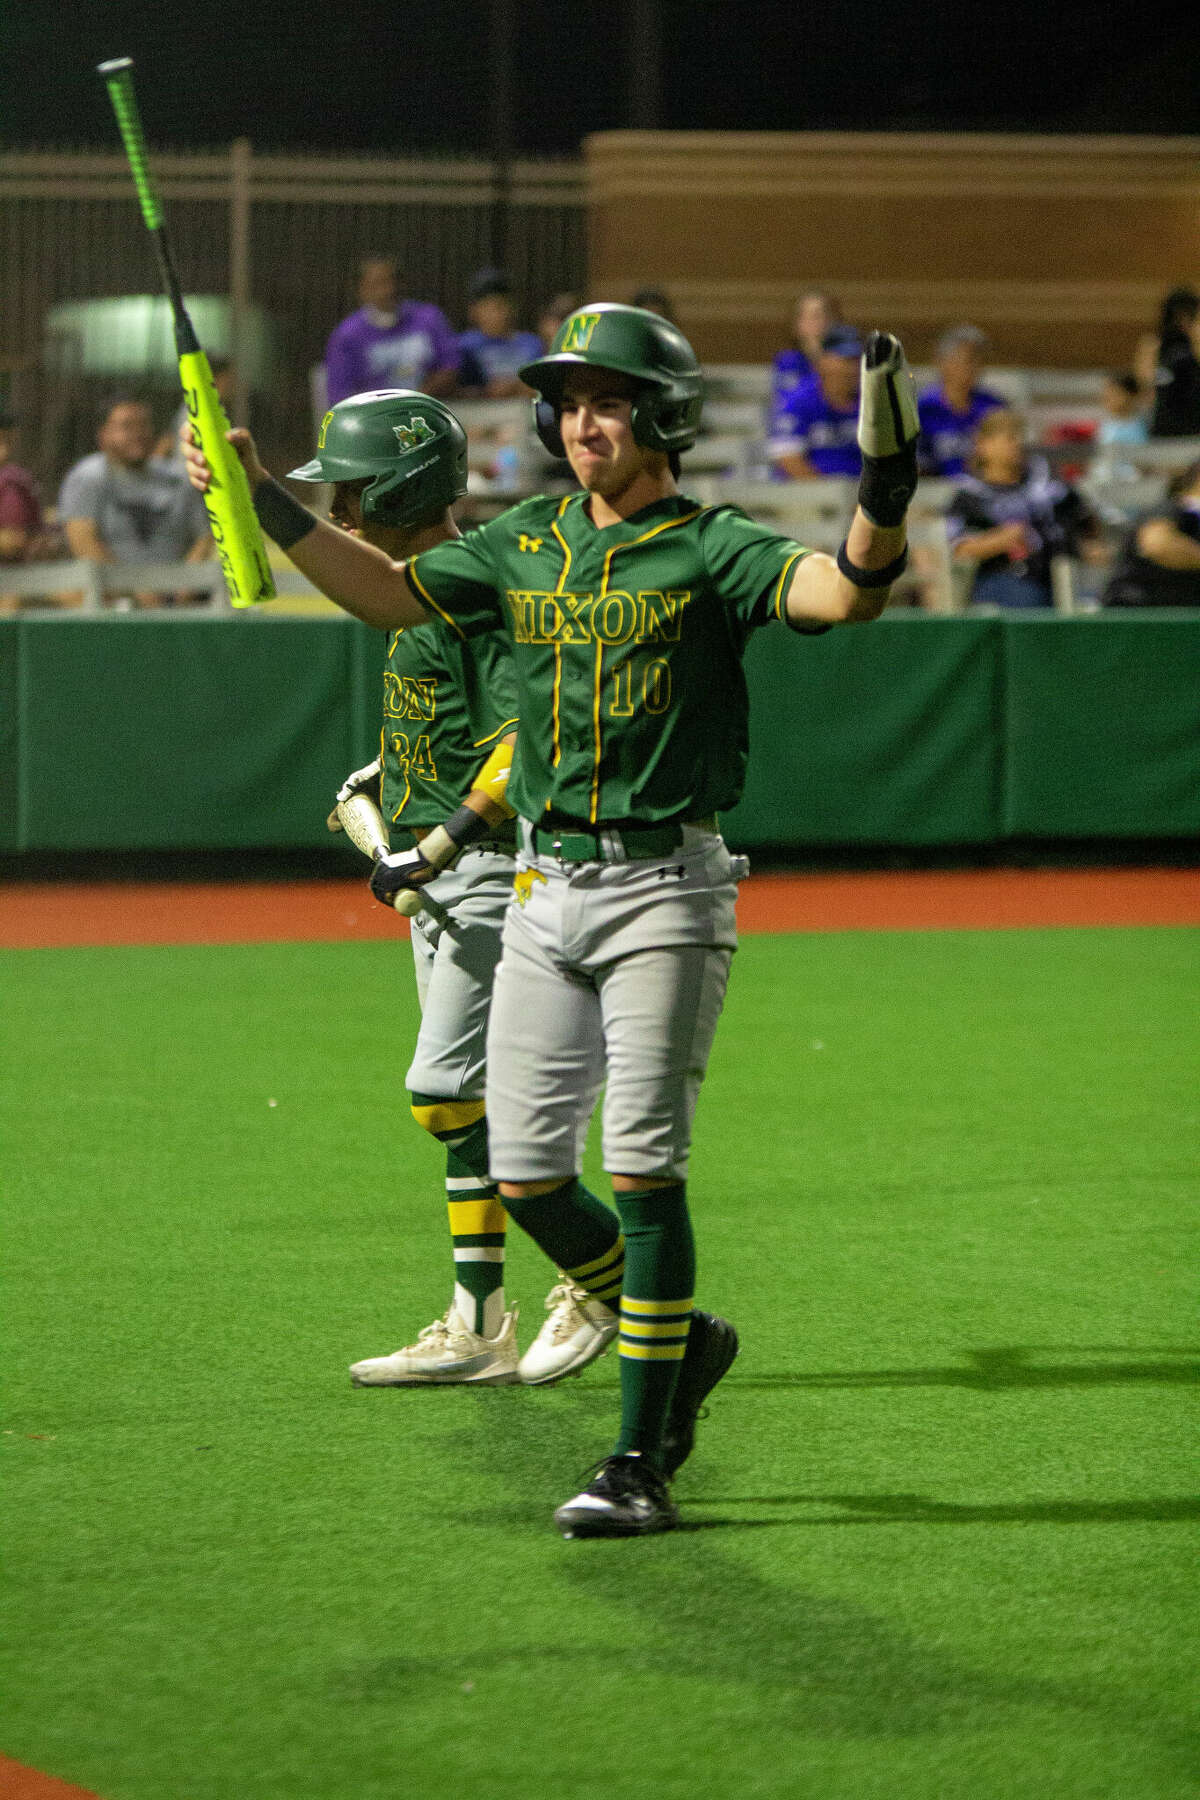 The Nixon Mustangs swept the Cigarroa Toros with a 7-1 win on Friday.